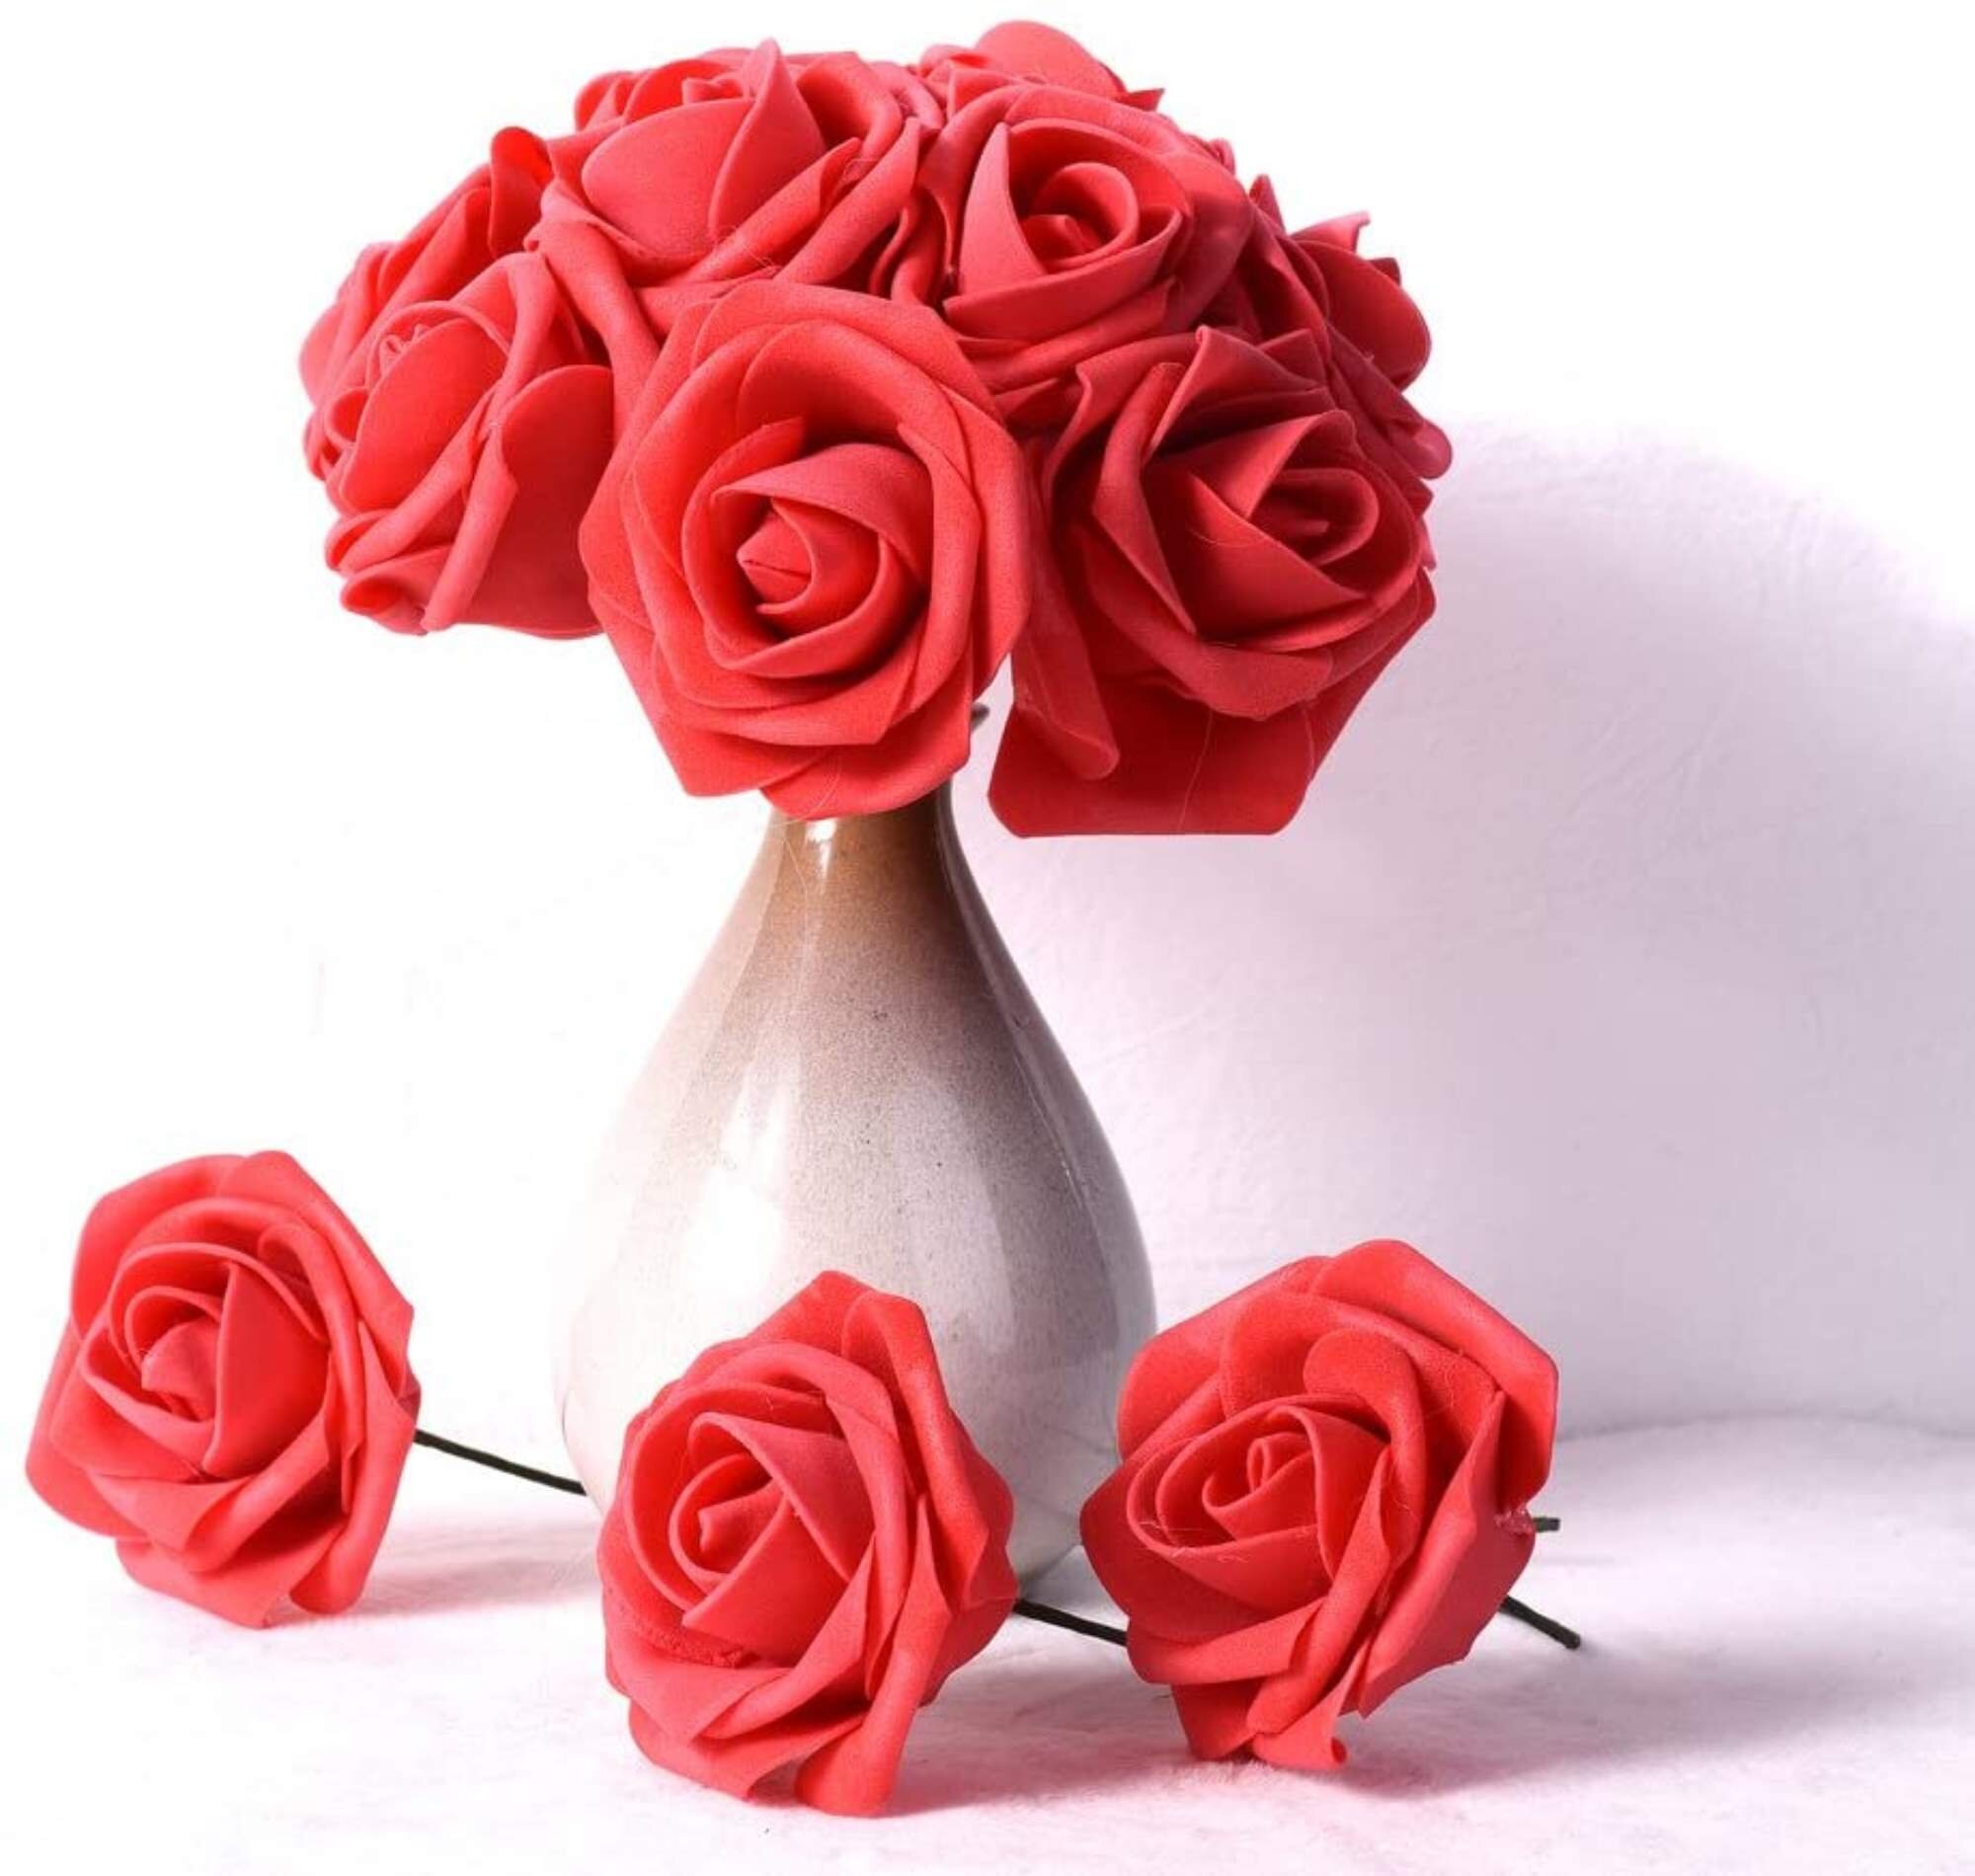 2 Bouquets Vintage Roses Artificial Flowers Dried Roses with Stems  Artificial Roses Fake Flowers for Table Wedding Bridal Shower Decorations